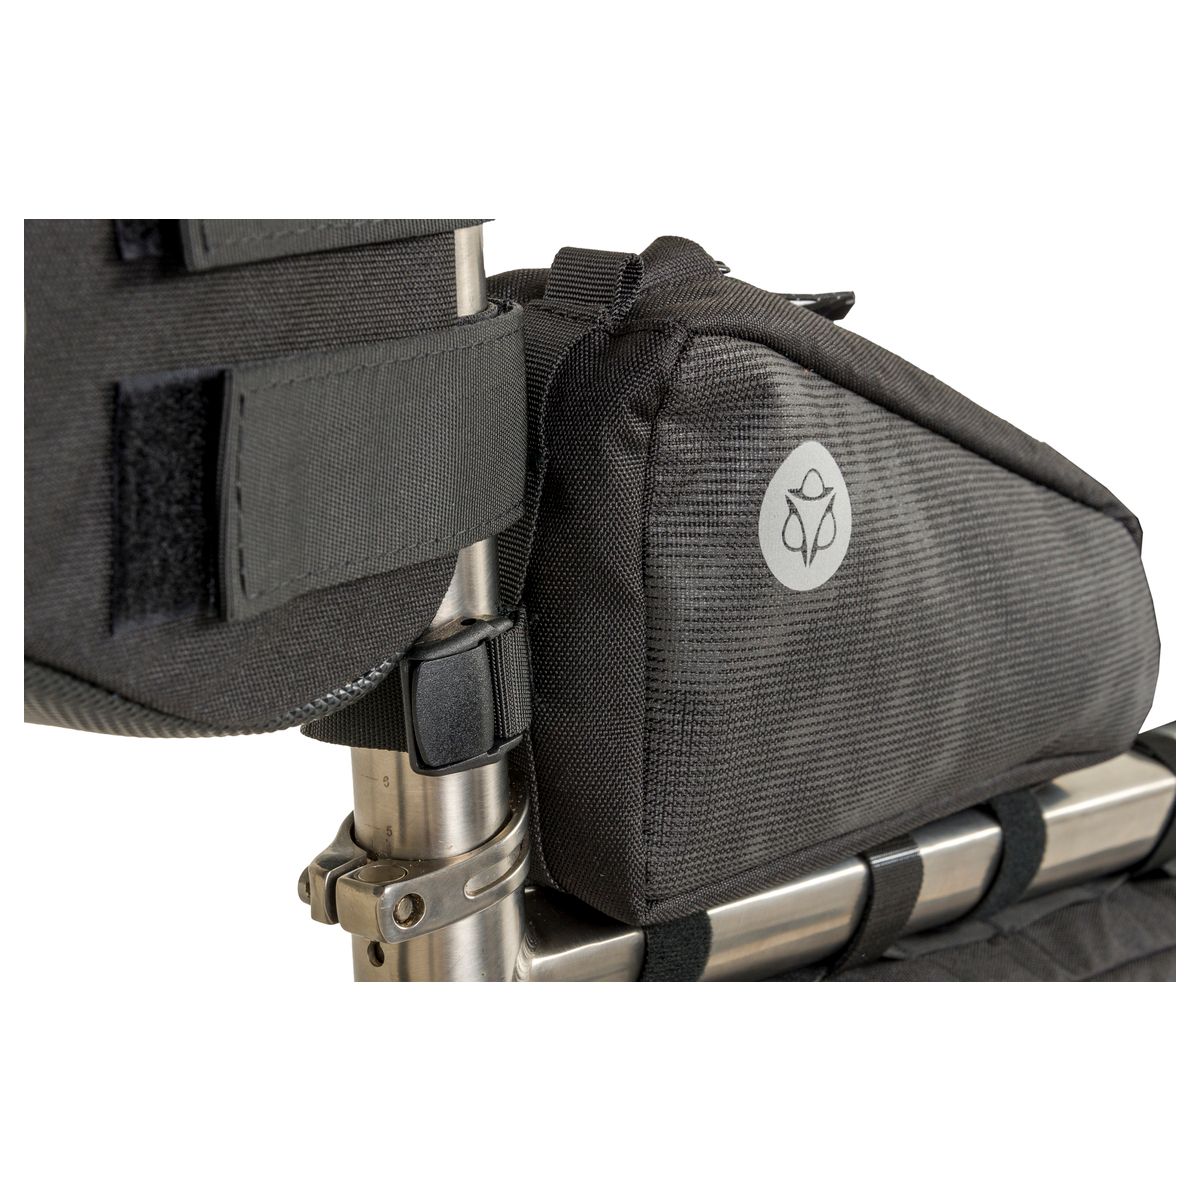 Top-Tube Frame Bag Venture fit example